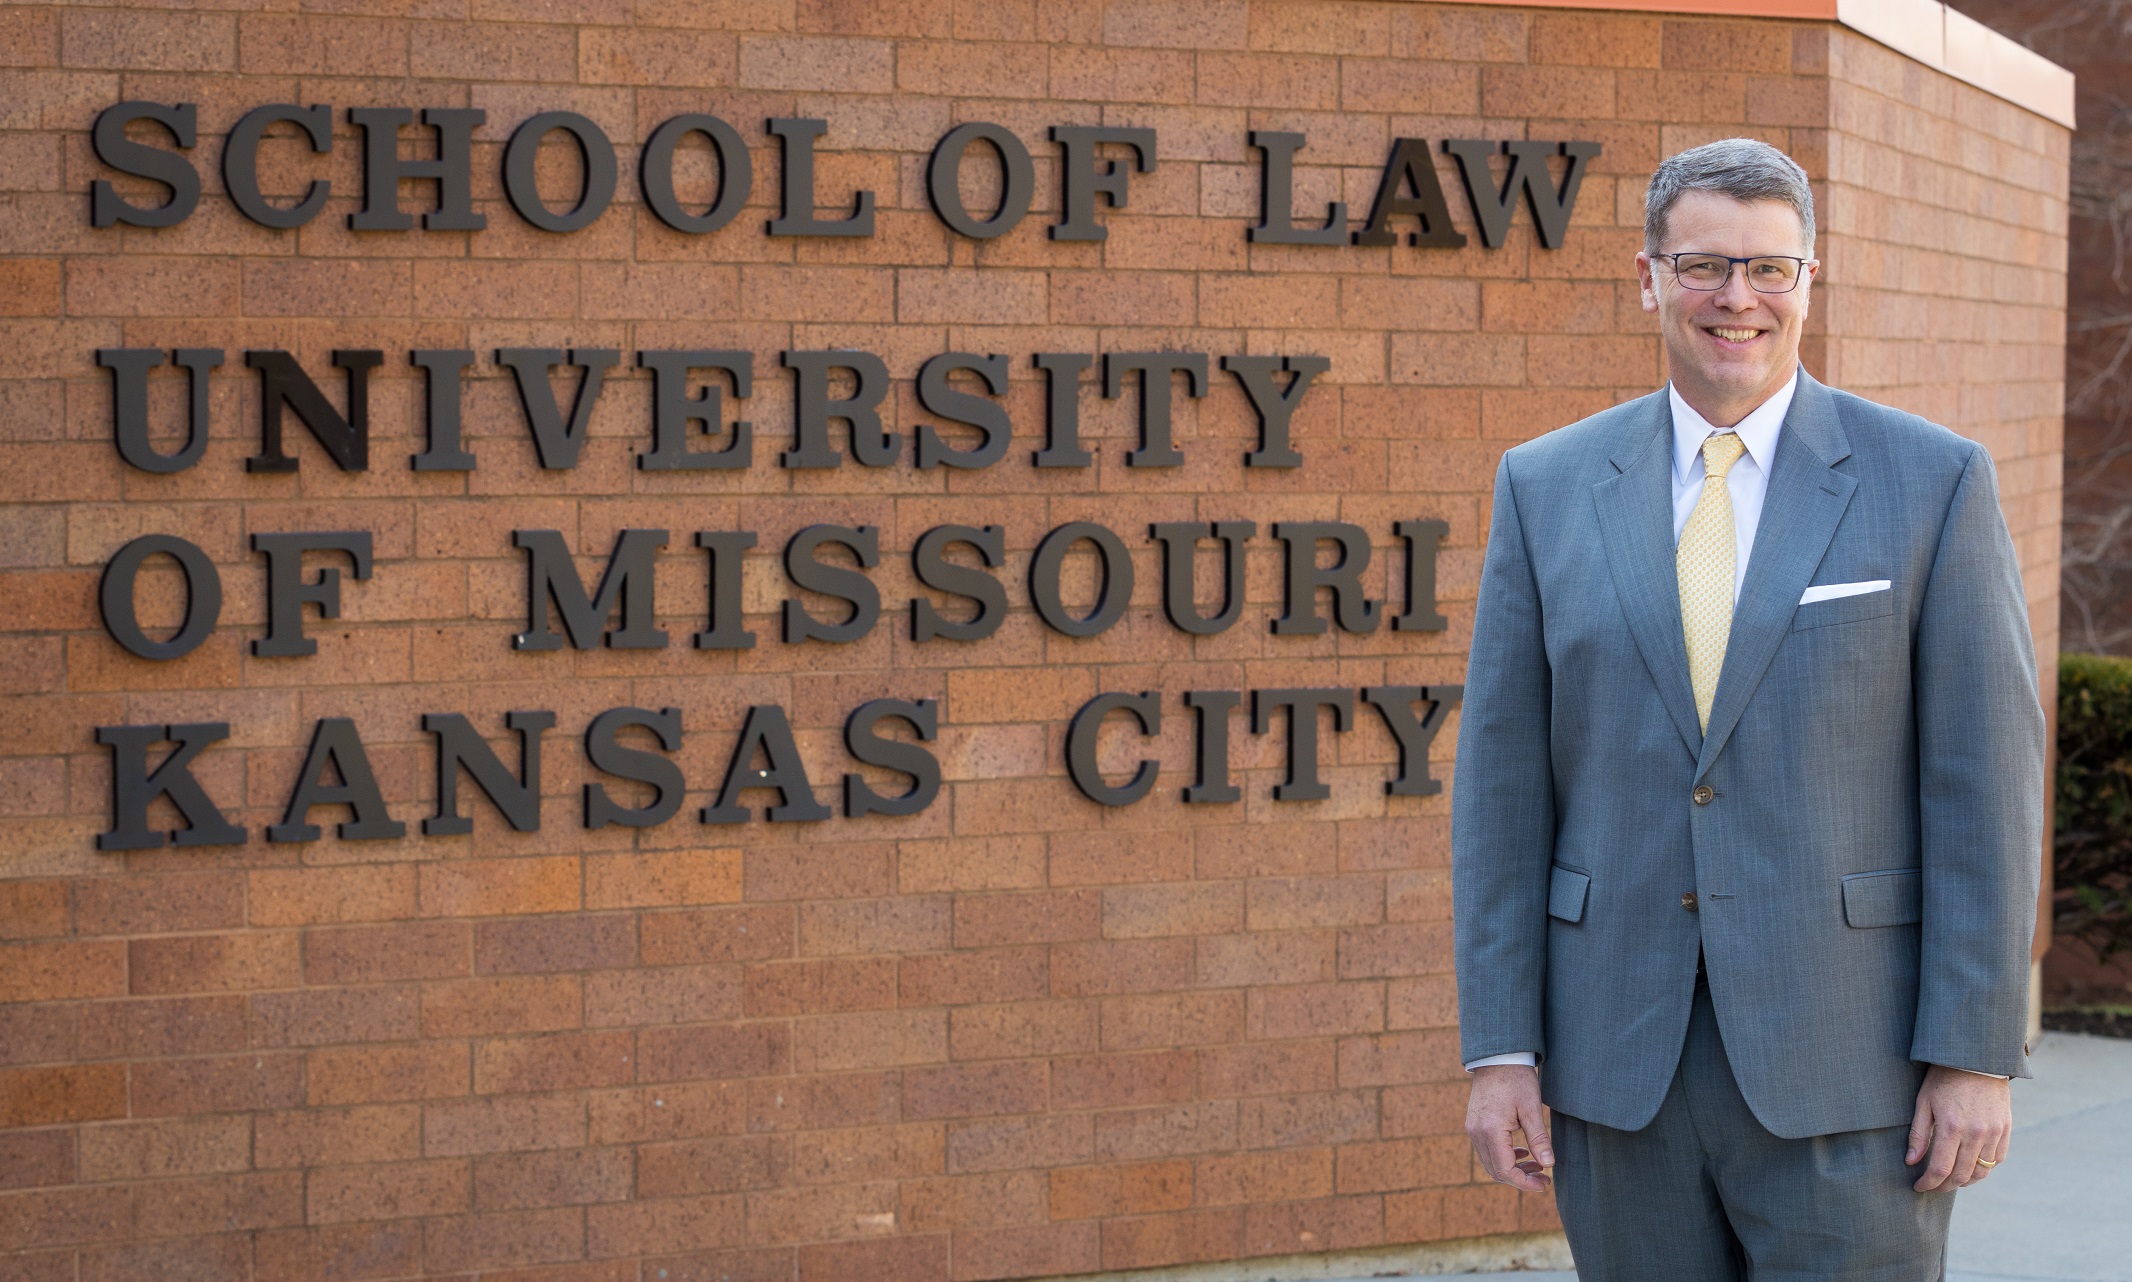 Lou Mulligan stands in front of the UMKC School of Law building